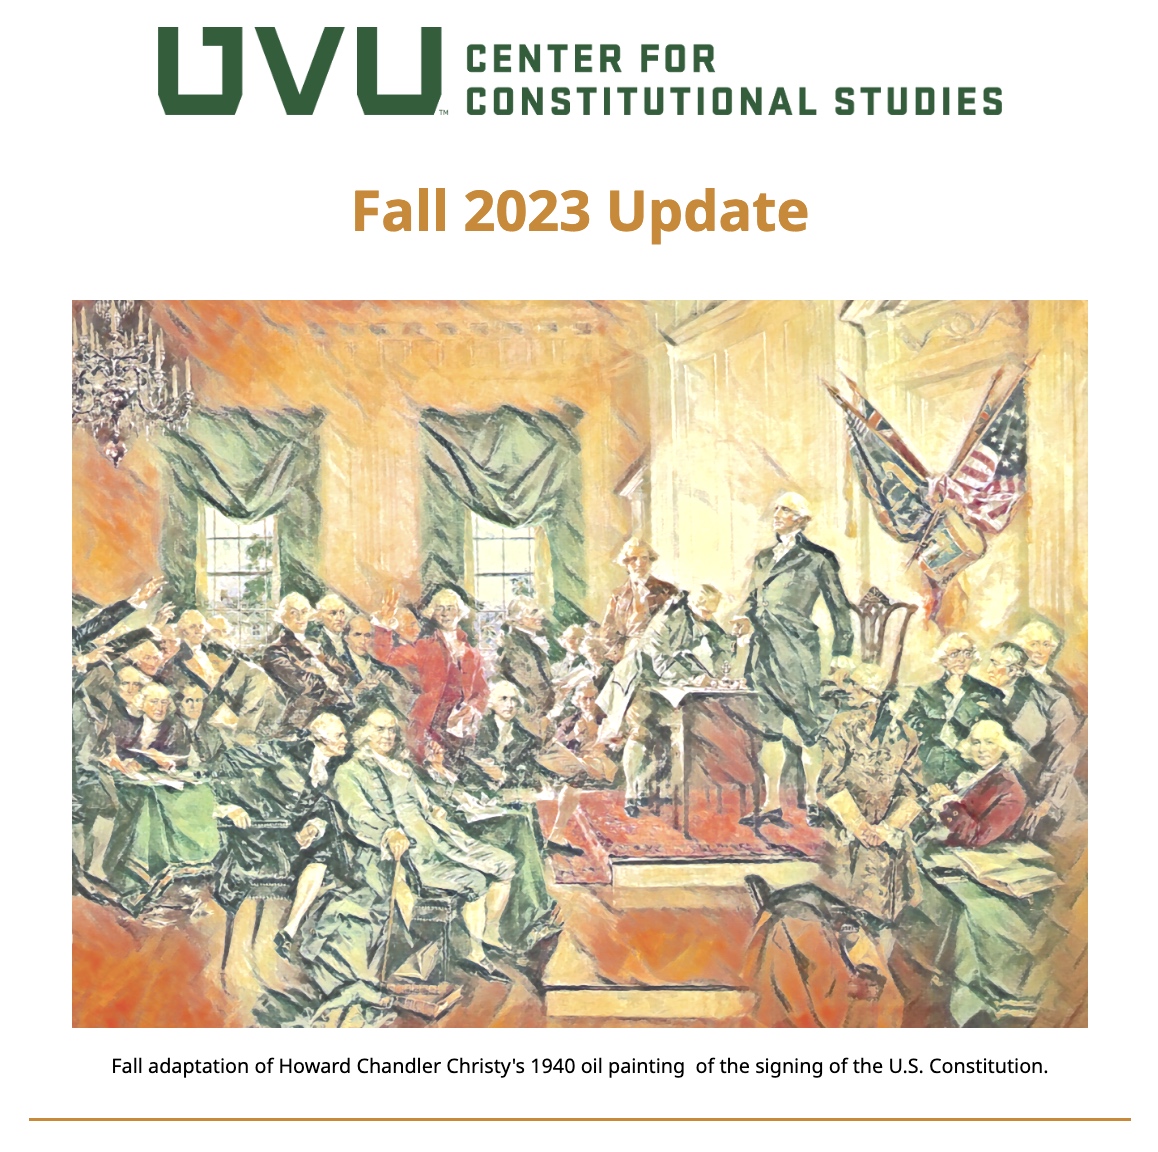 Image of the CCS Newsletter for Fall 2023